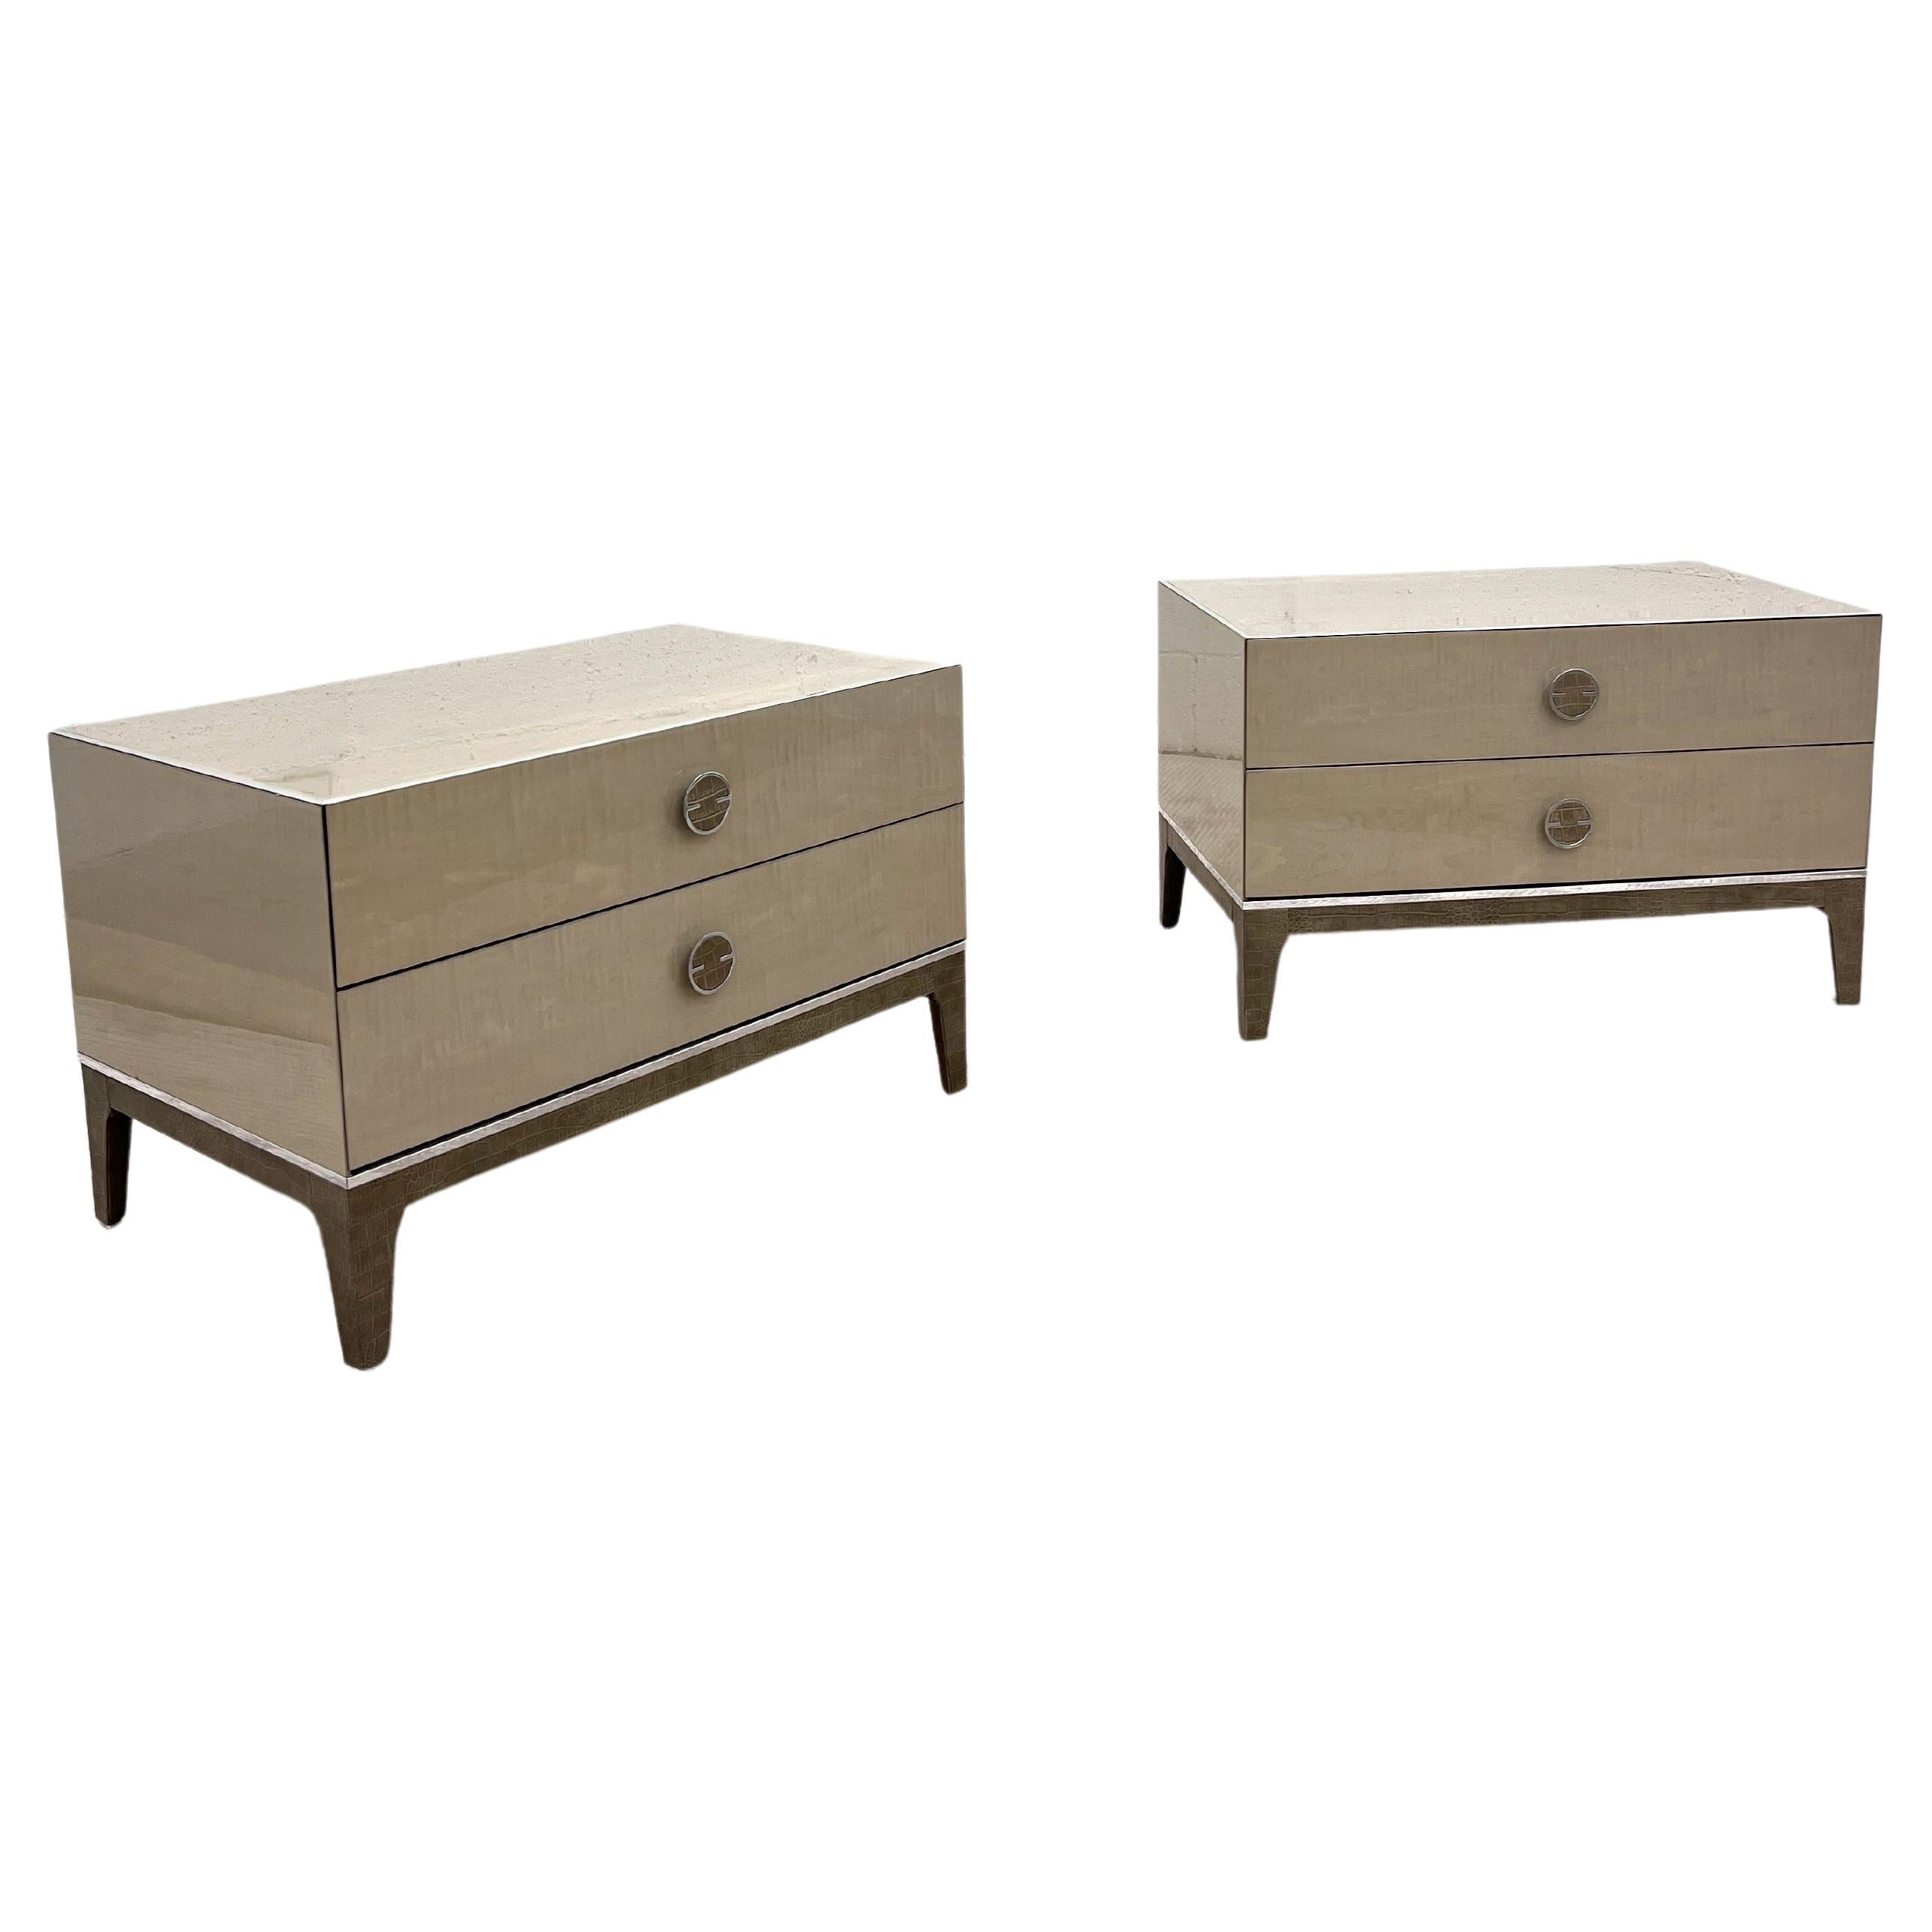 Cantoni Taupe, leather, and chrome contemporary Italian minimalistic nightstands For Sale